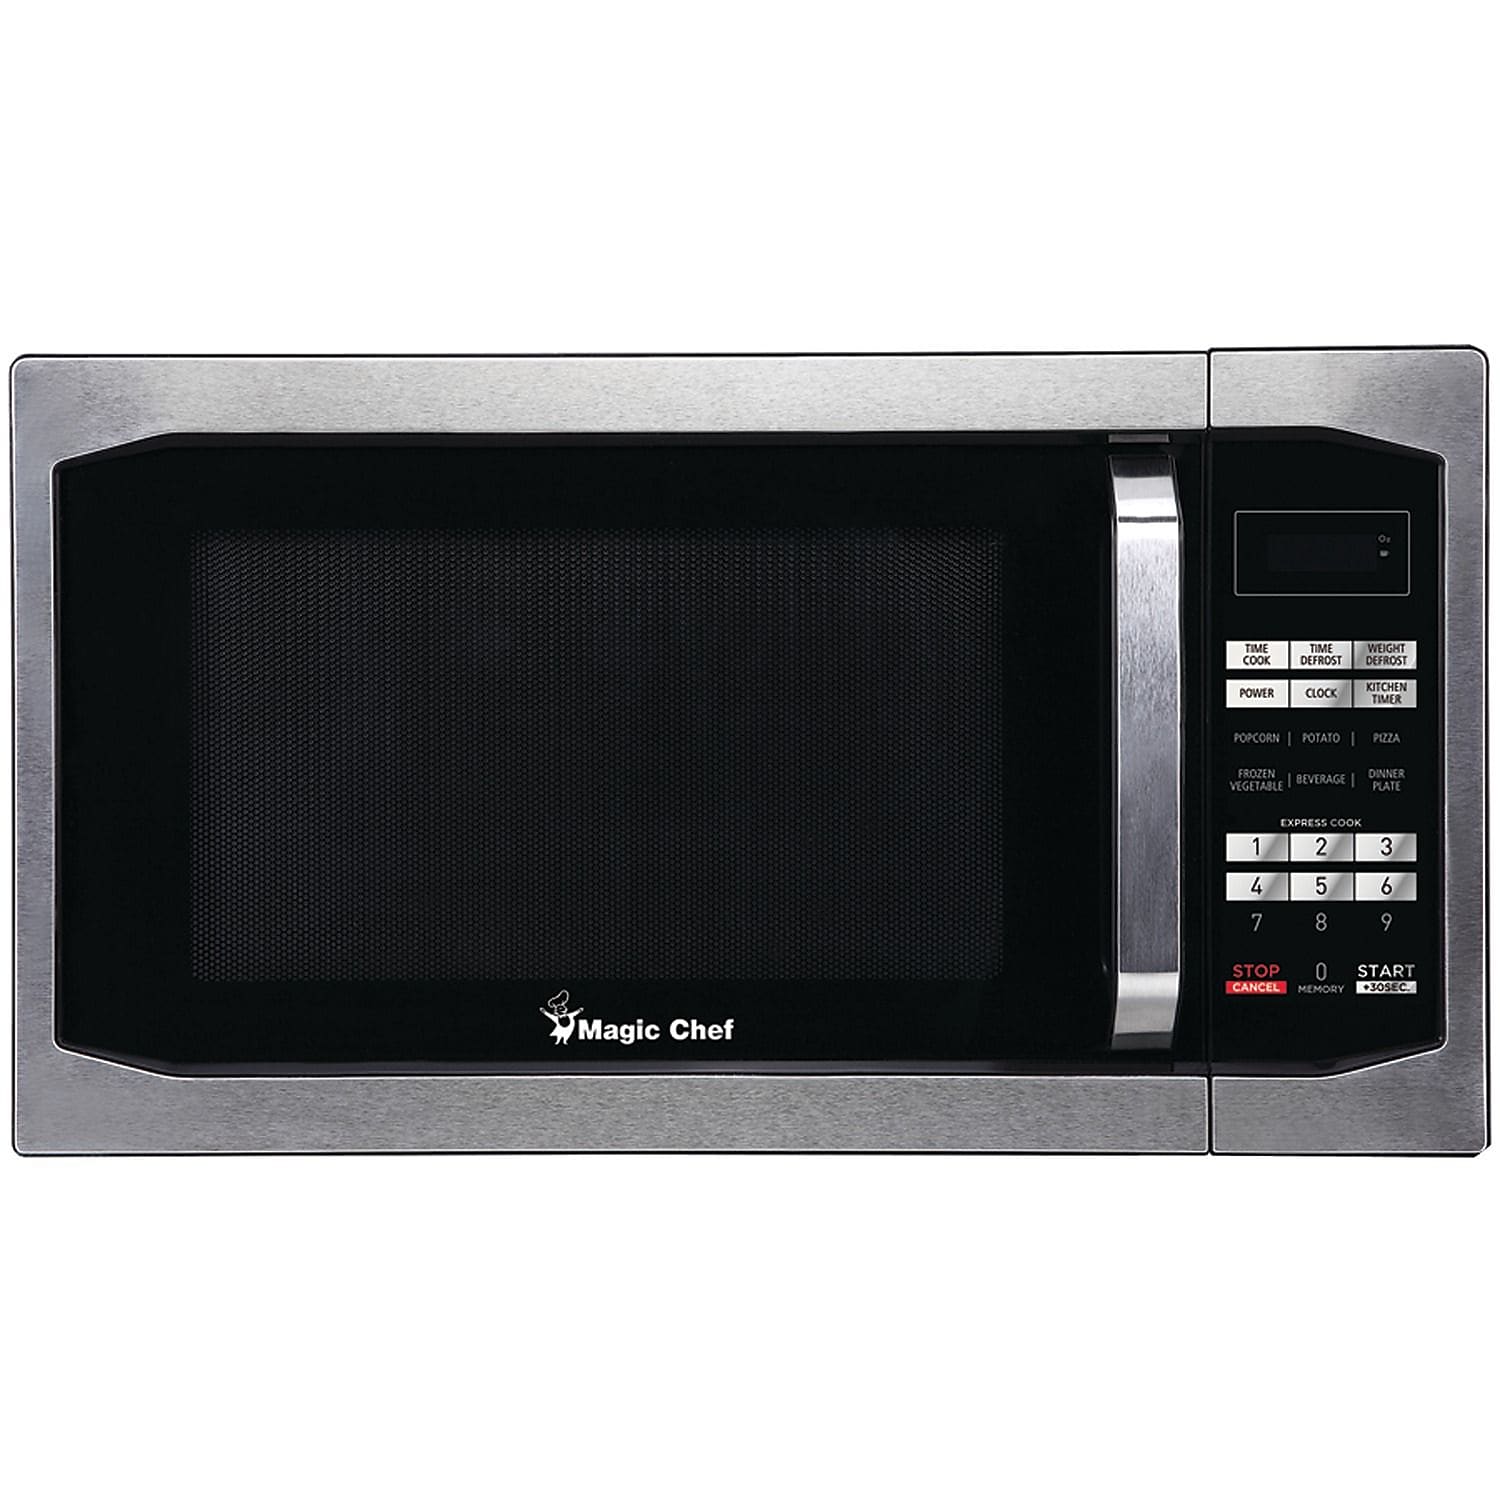 Magic Chef 1.6 Cubic-Ft Countertop Microwave Stainless Steel MCM1611ST